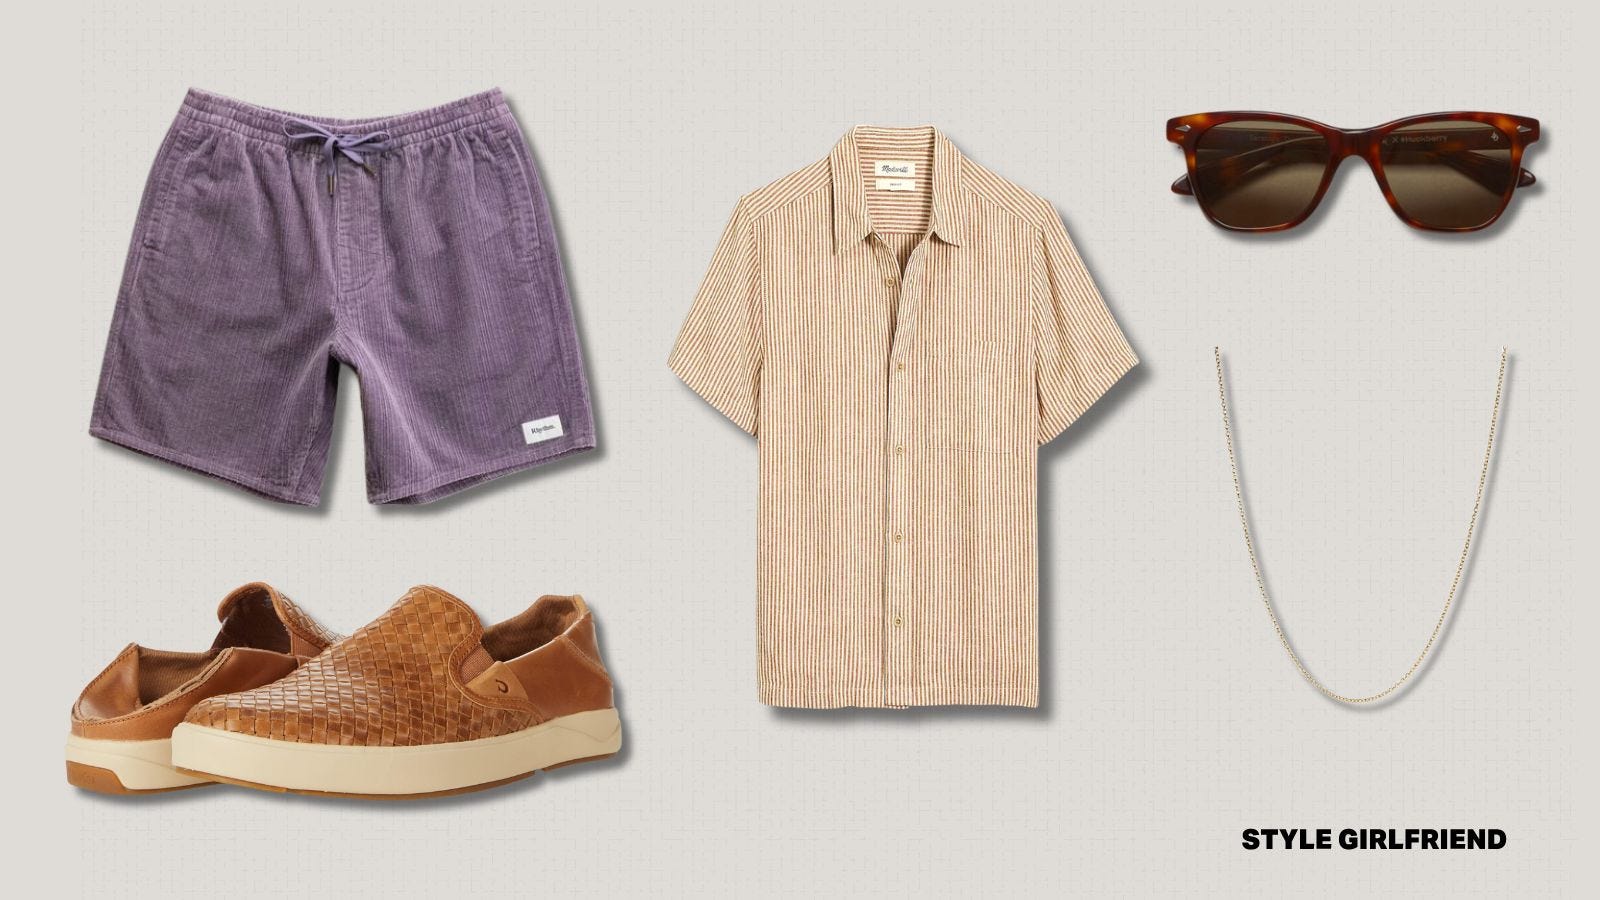 casual shorts outfit for men featuring purple corduroy drawstring shorts, brown leather slip-ons, a short-sleeve striped button up shirt, tortoiseshell sunglasses and a chain necklace